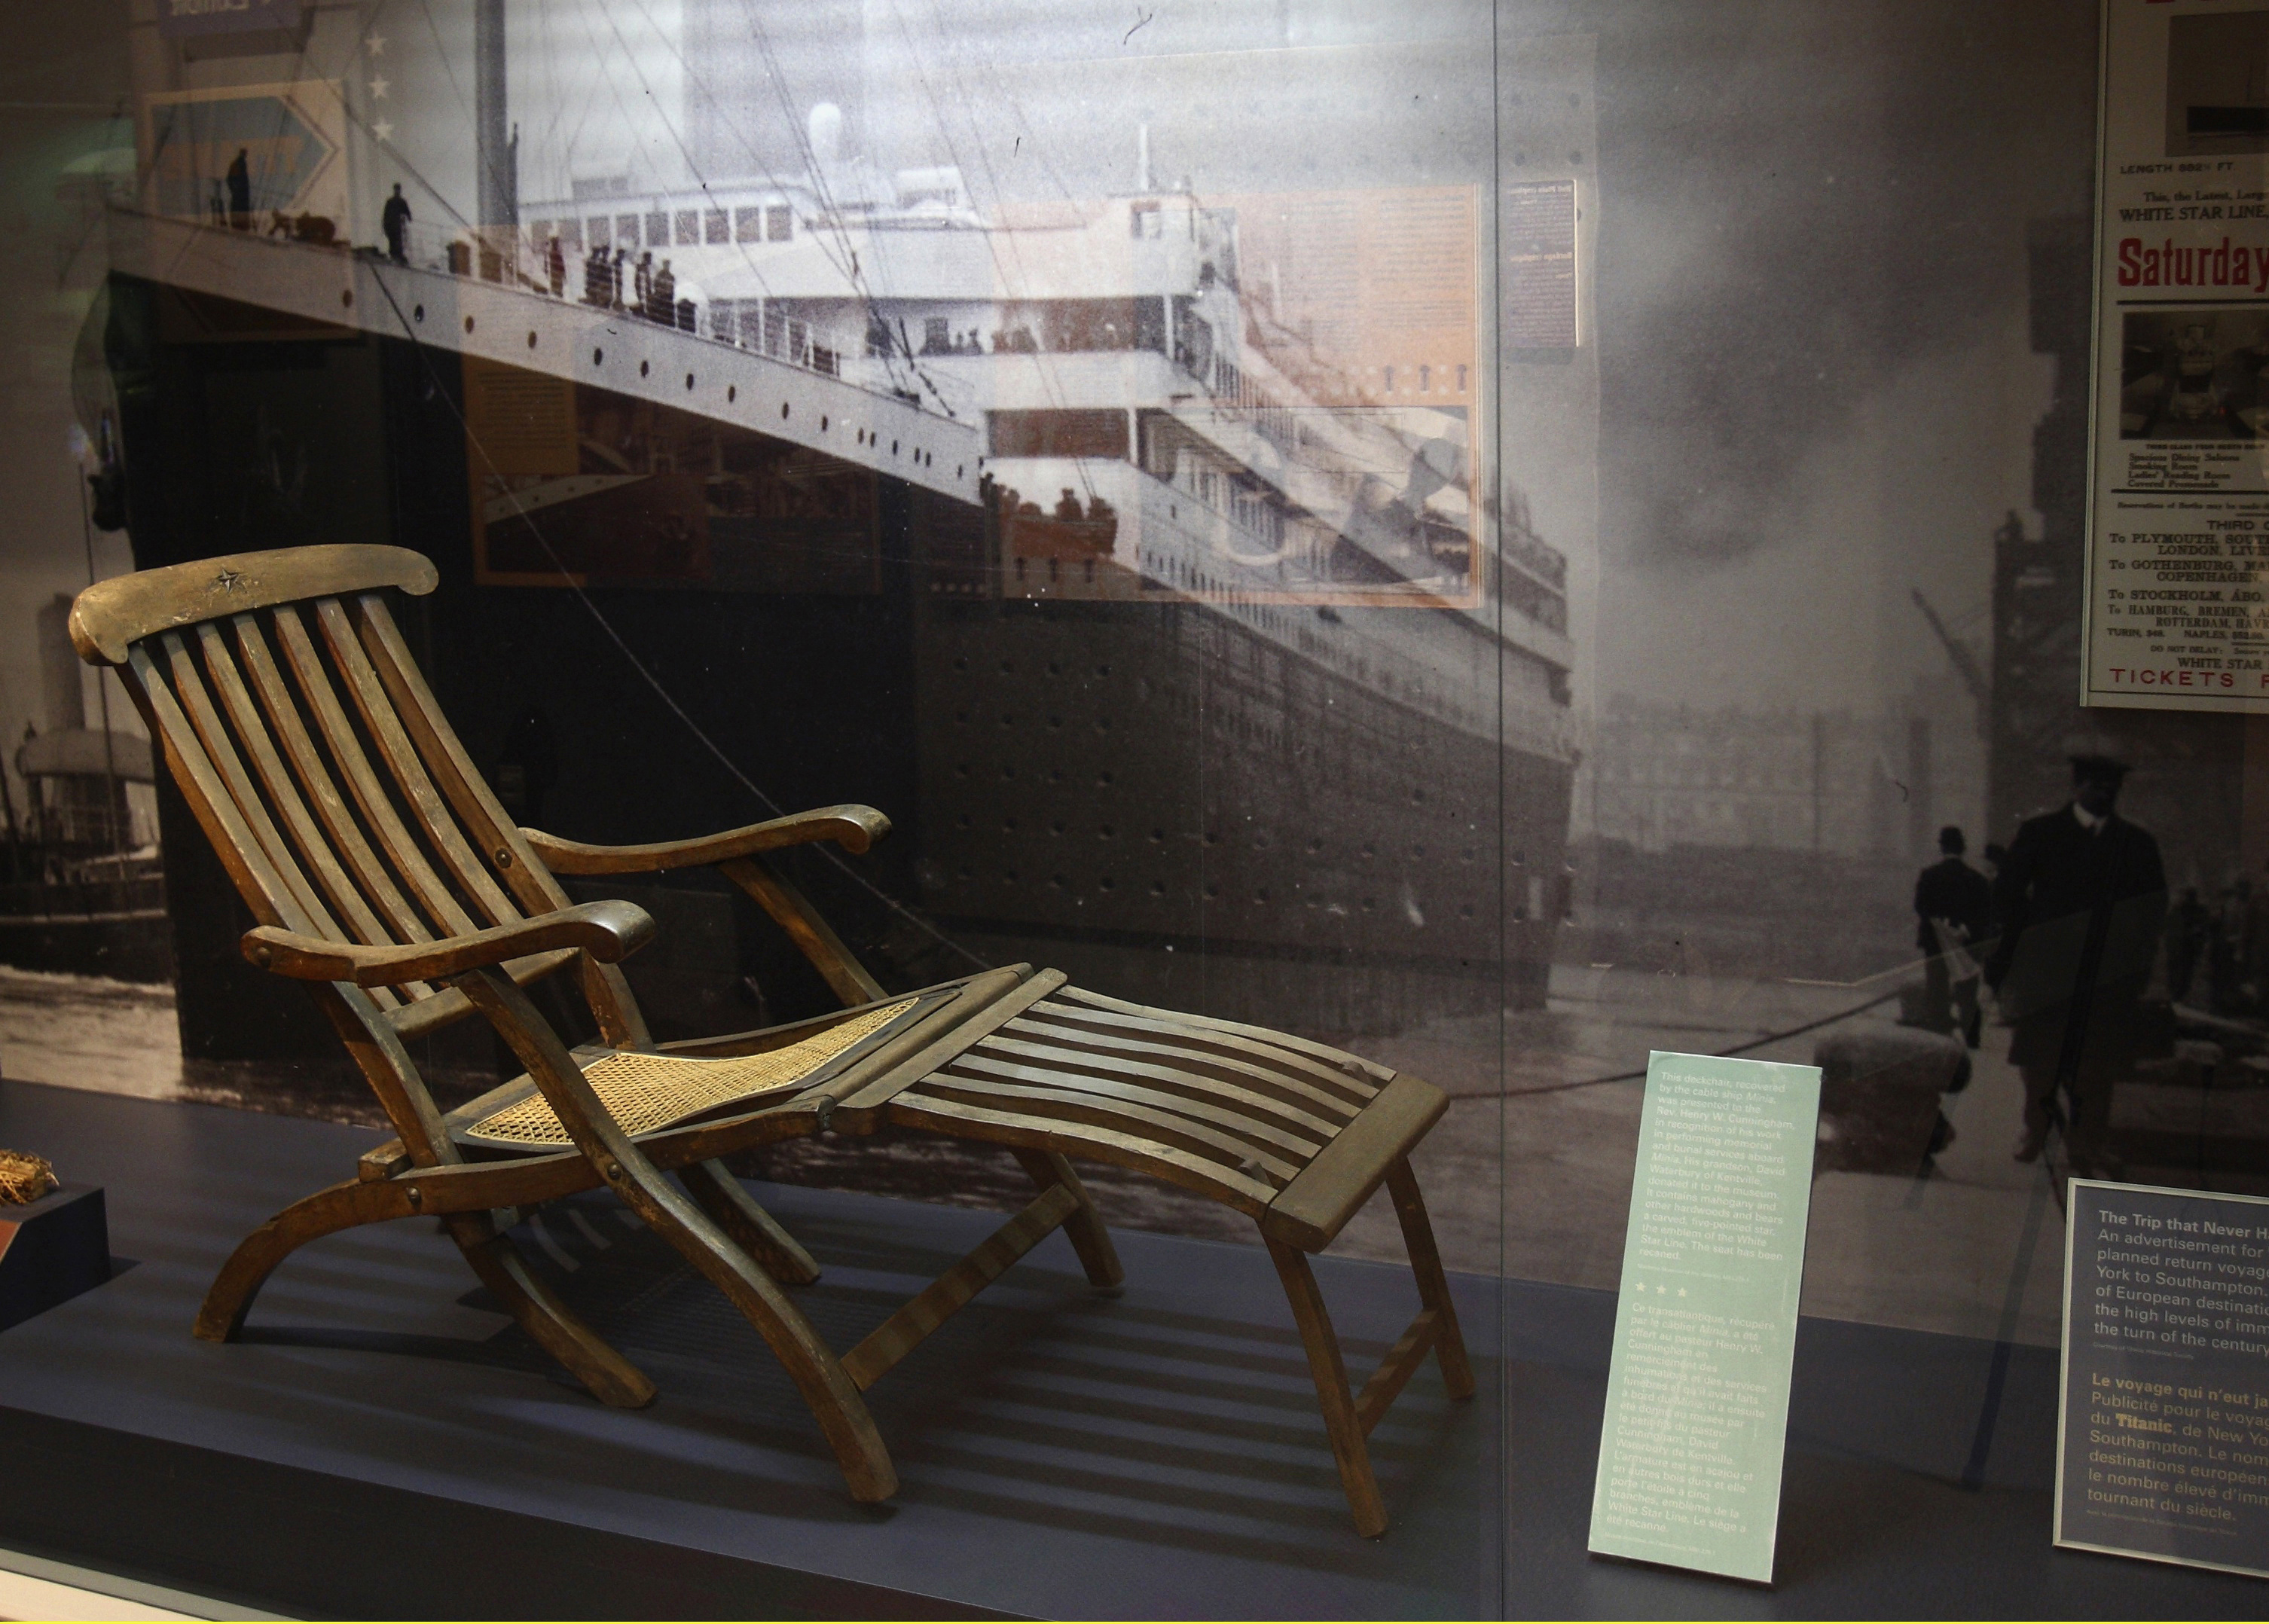 A mahogany deck chair from the Titanic recovered by the crew aboard the CS Minia is seen in the Maritime Museum of the Atlantic in Halifax, Canada, January 27, 2012. (Paul Darrow—Reuters /Landov)